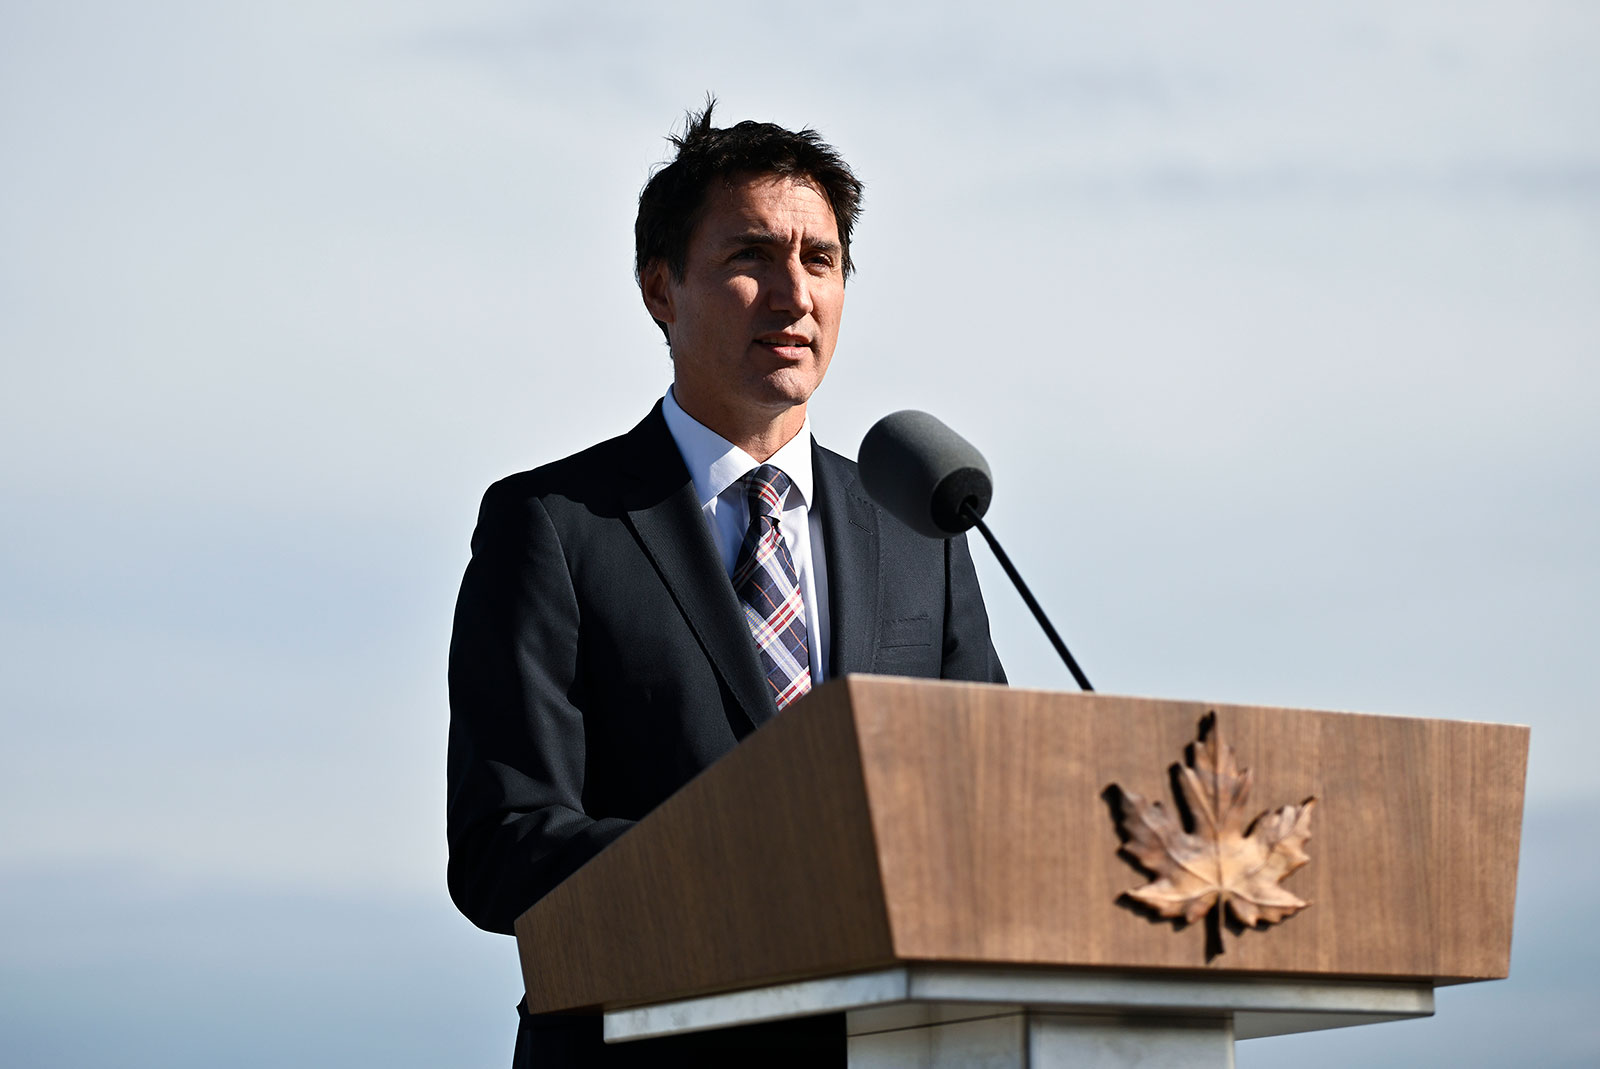 Canada's Prime Minister Justin Trudeau makes a statement in Ottawa, Ontario, on September 5.